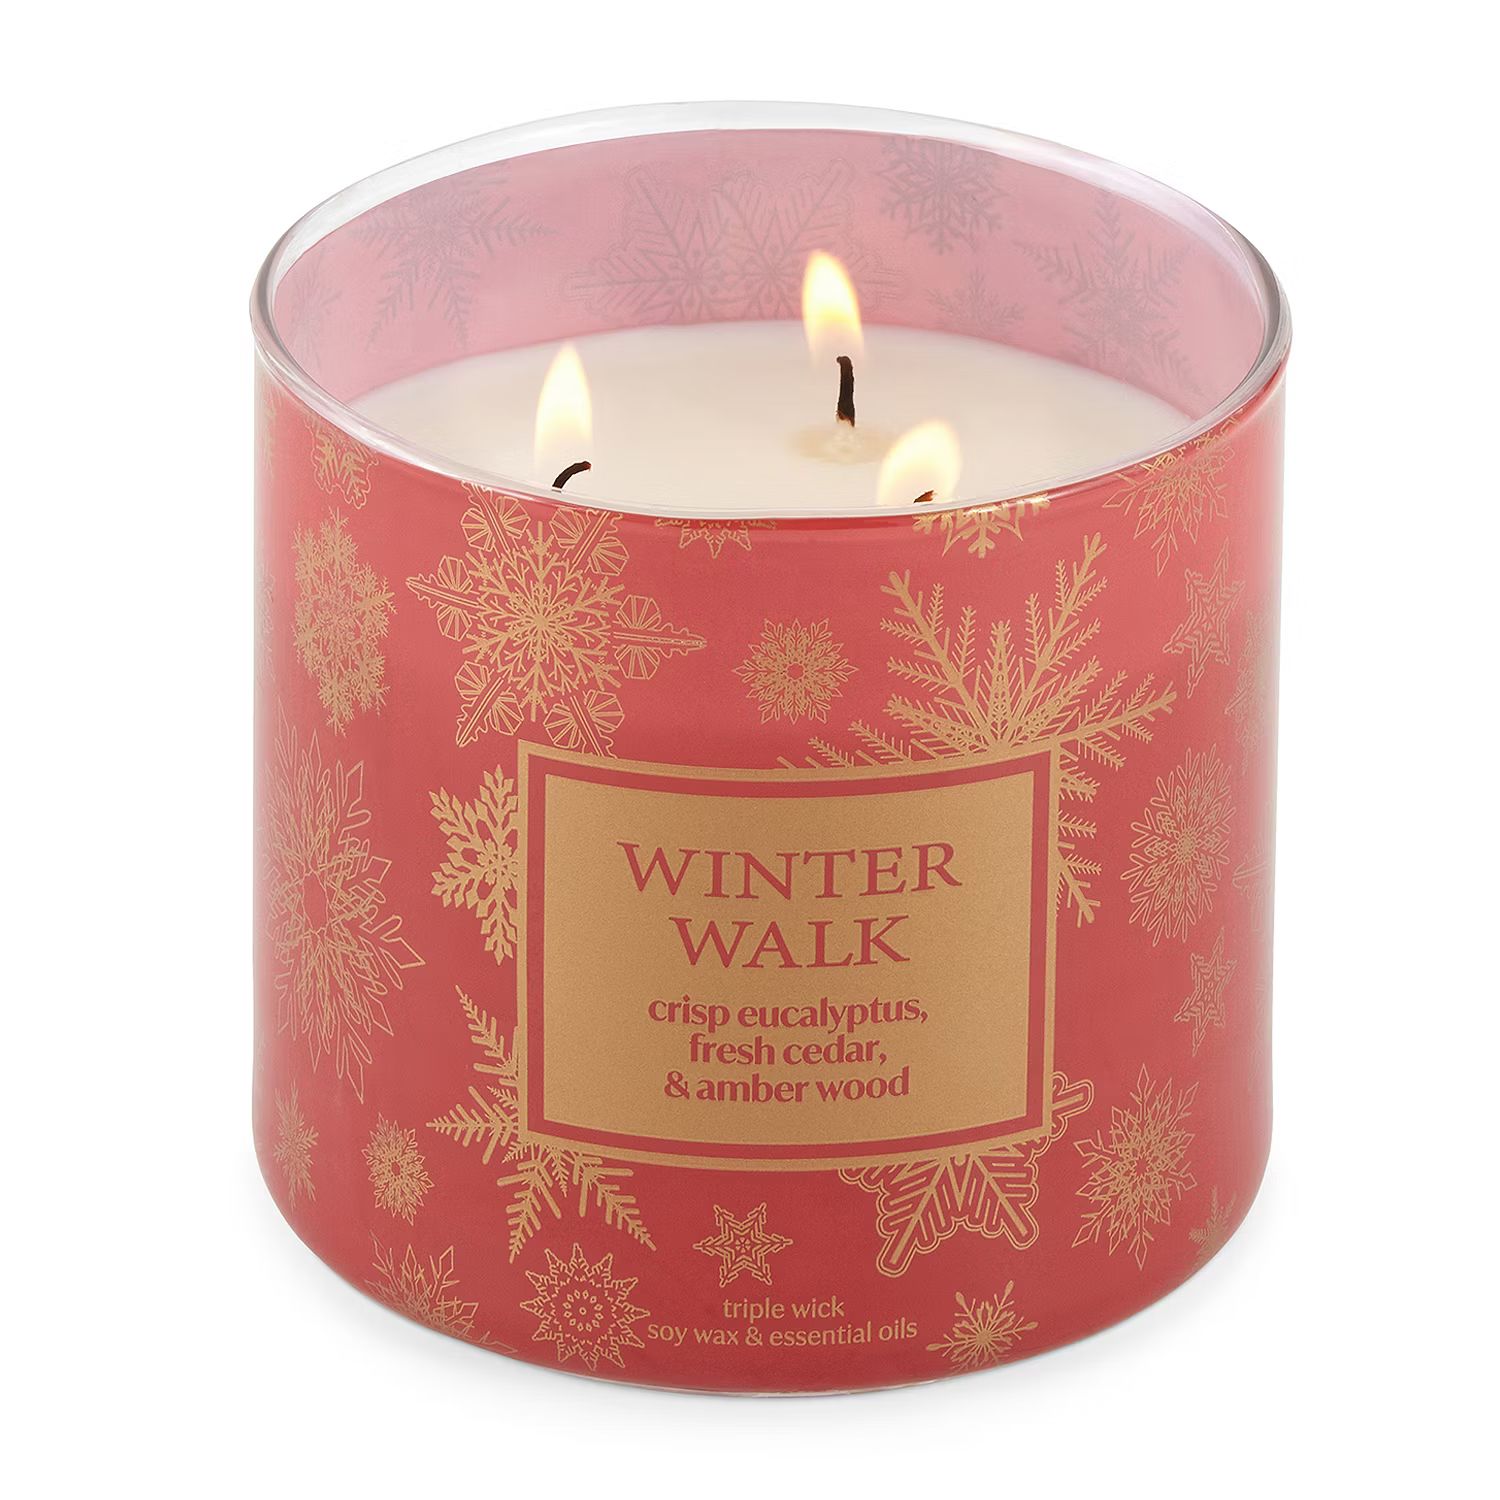 Distant Lands 14 Oz 3 Wick Winter Walk Scented Jar Candle | JCPenney